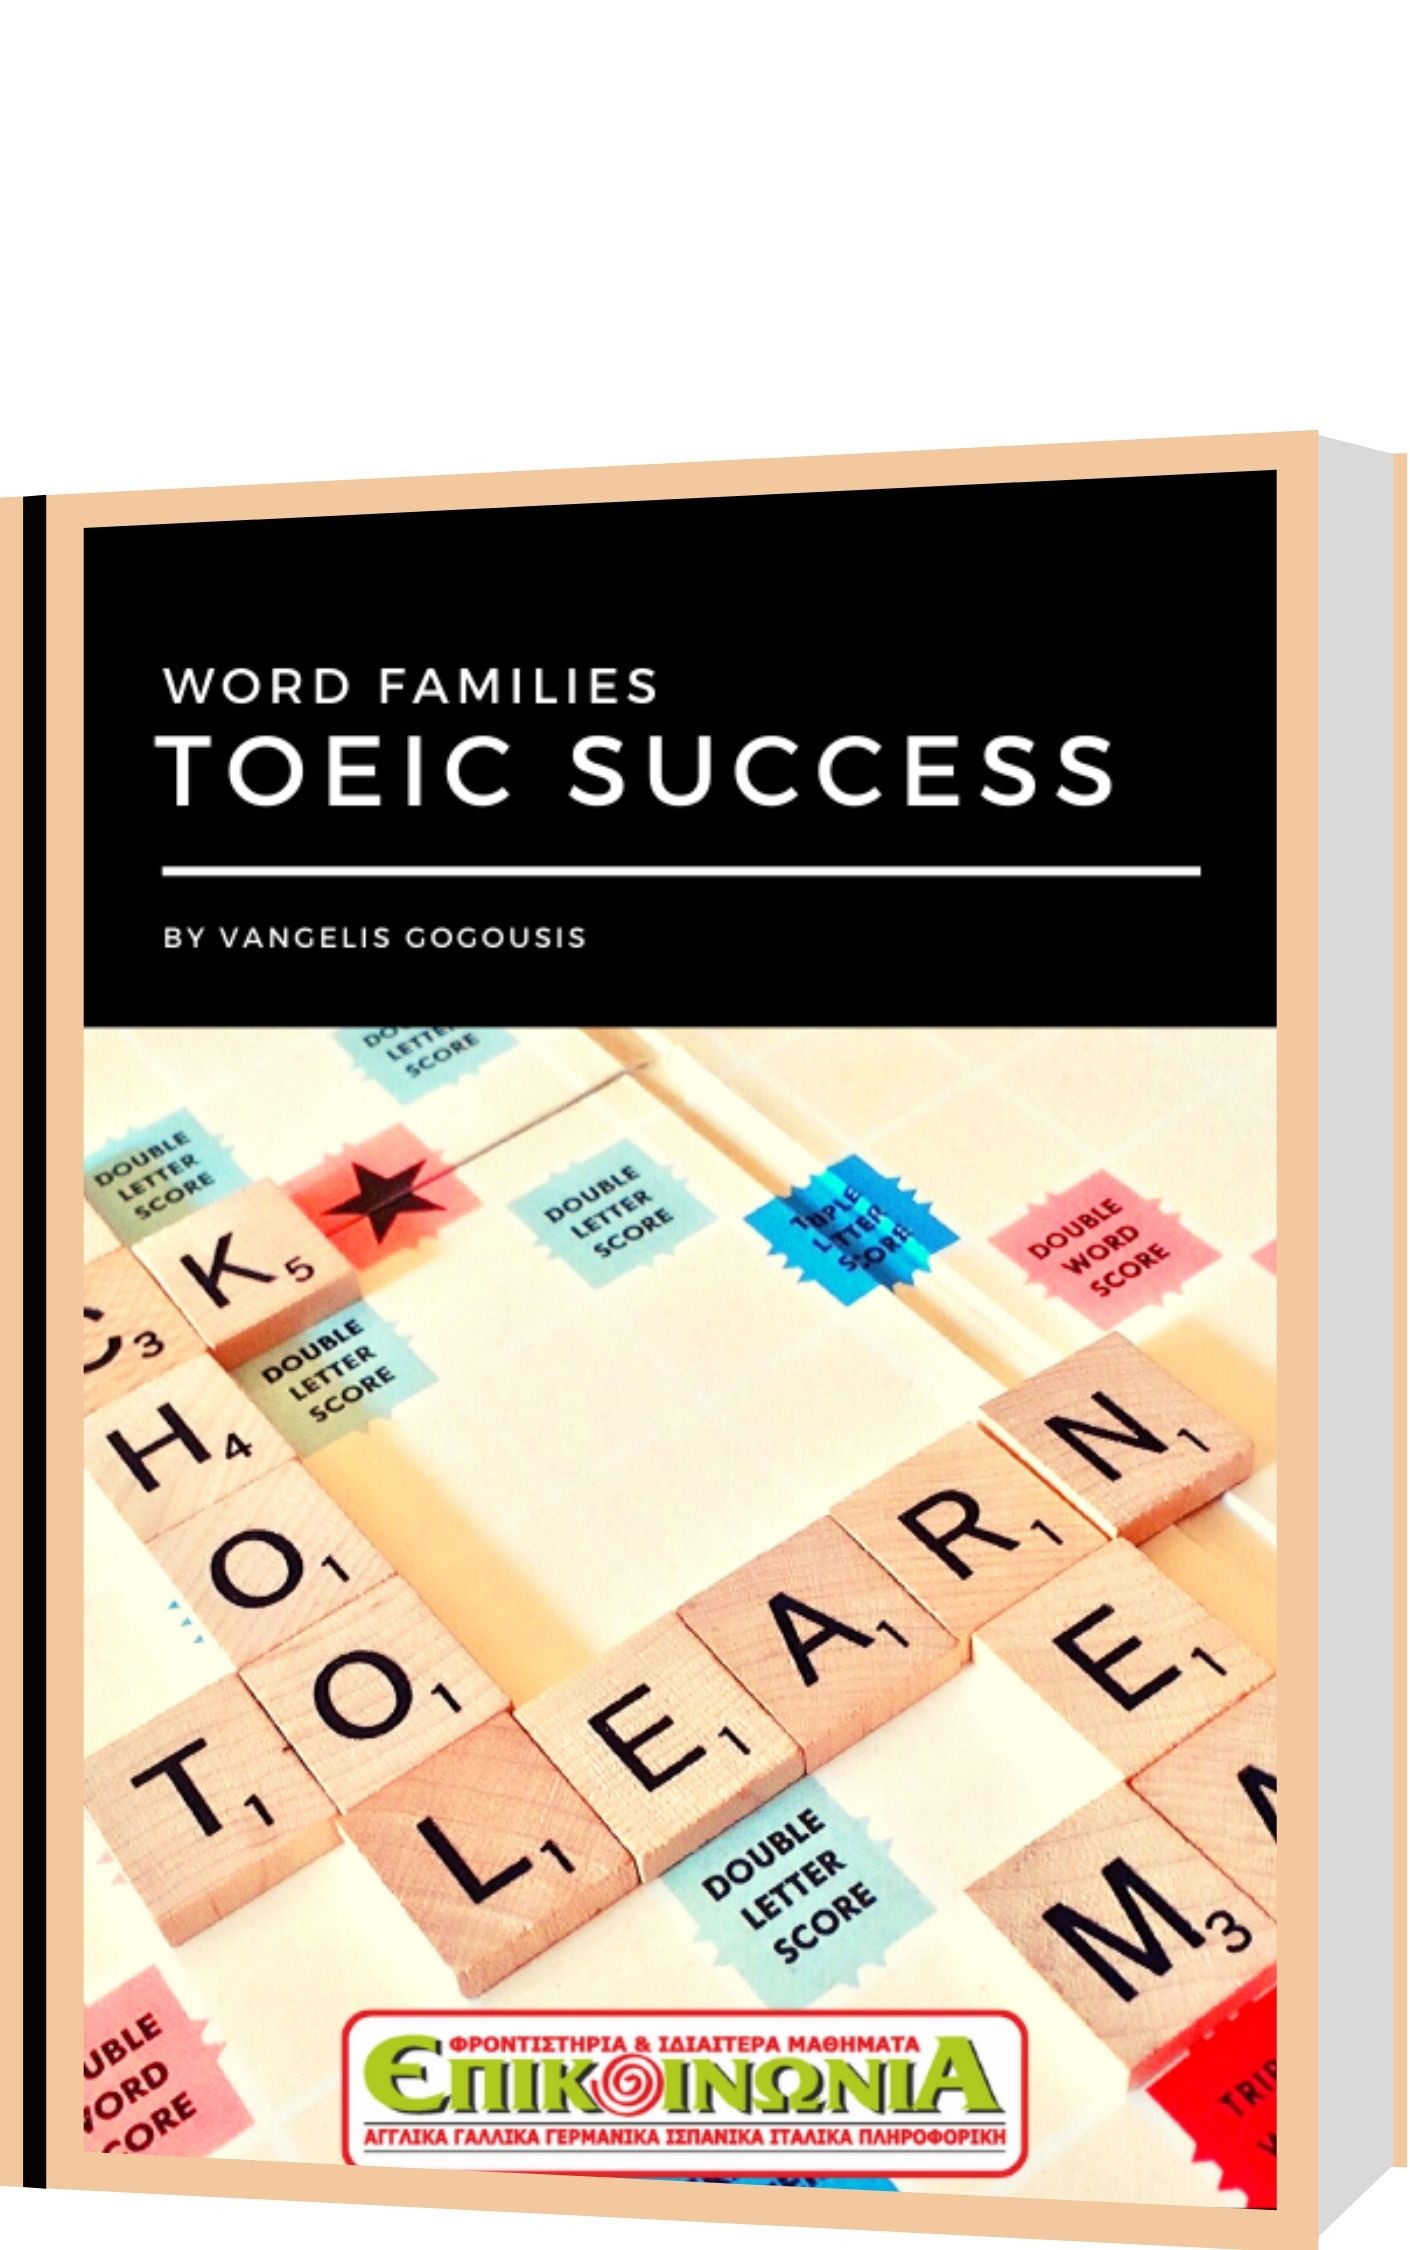 Toeic Success-Word Families